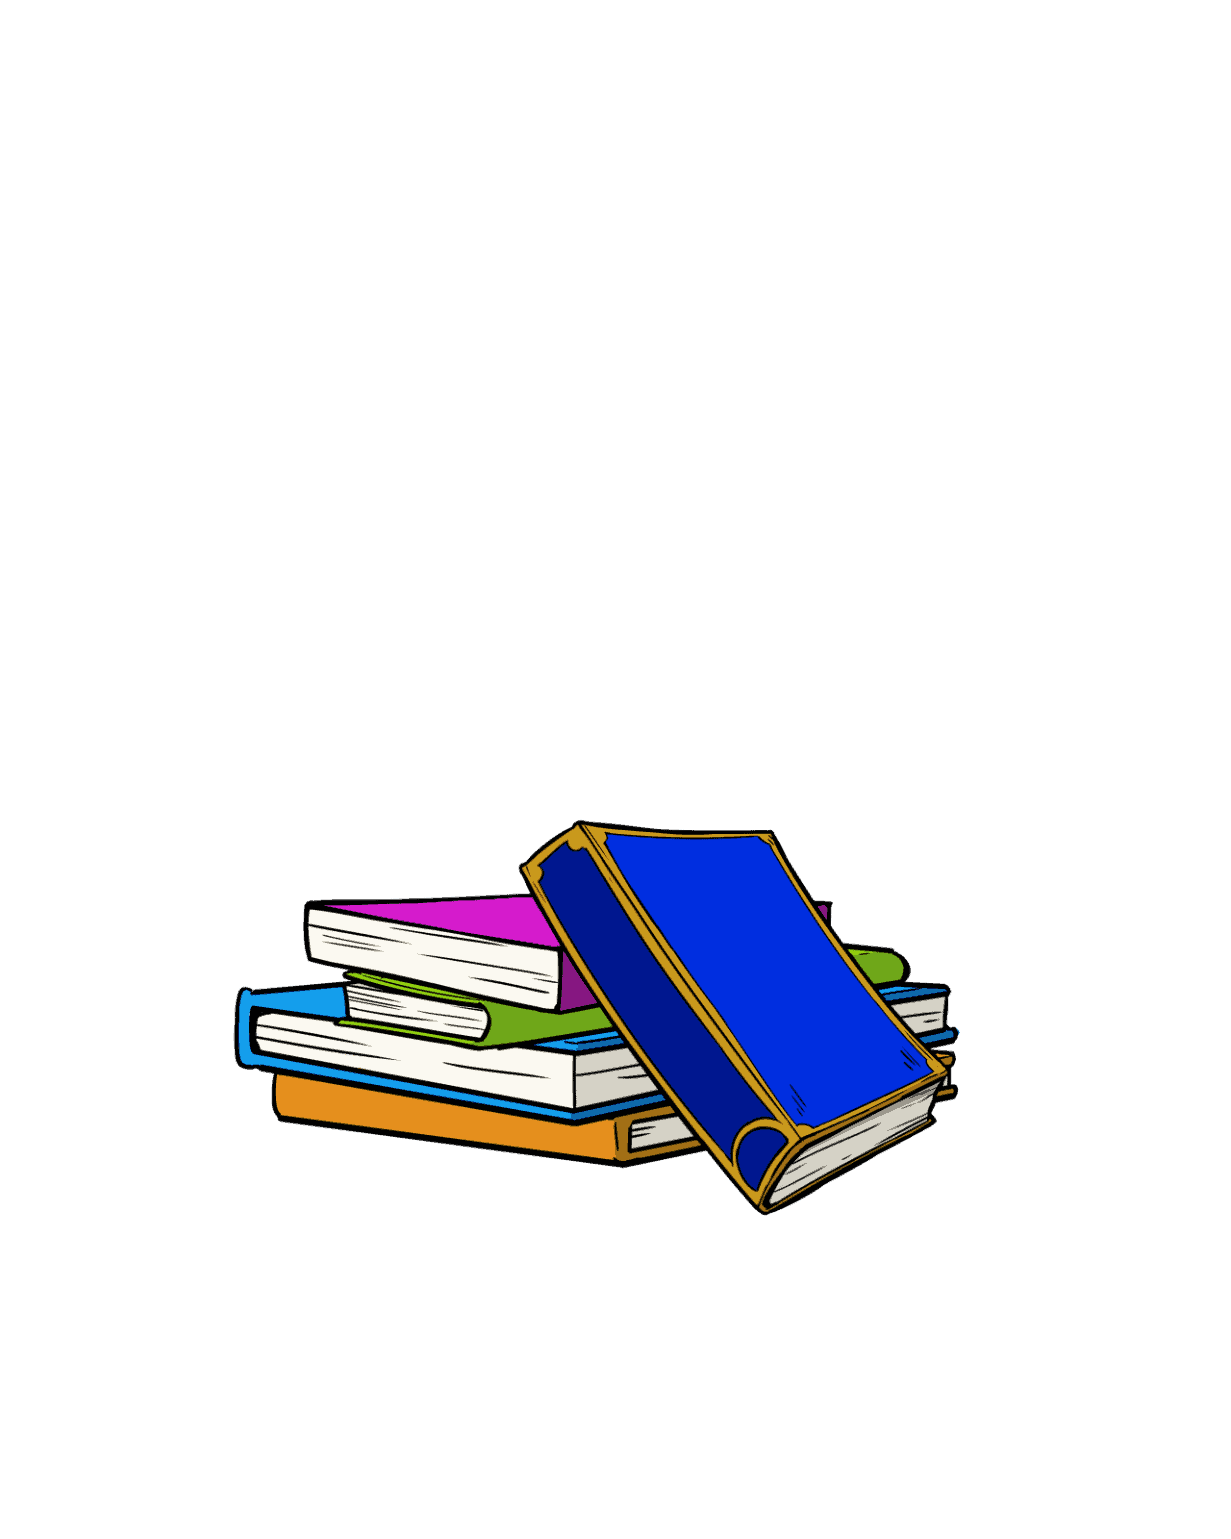 cartoon/illustration of a stack of books.